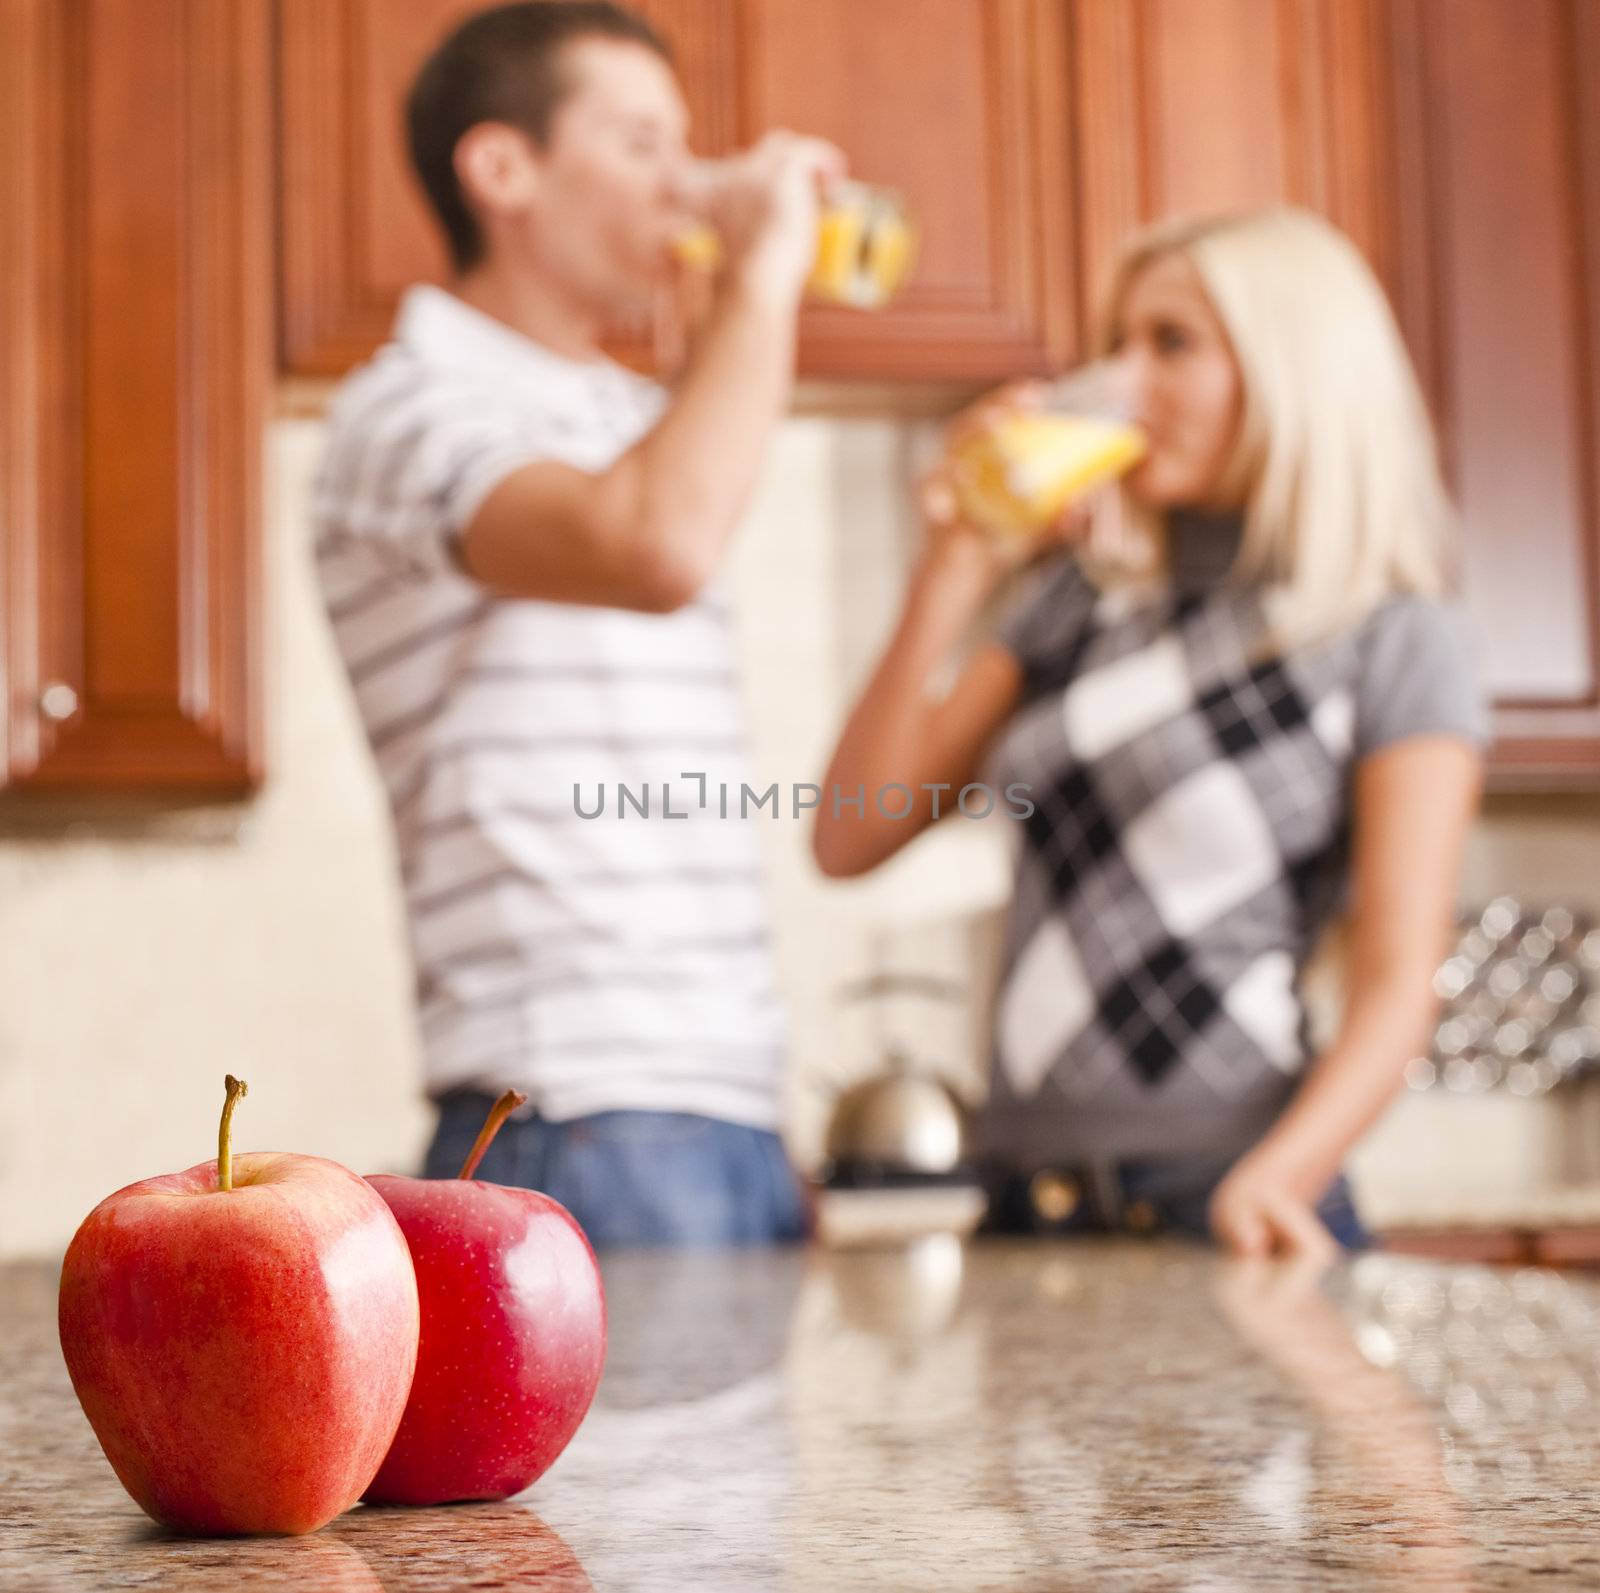 Young couple in kitchen drinking a glass of orange juice, two apples on counter in foreground. Square format.